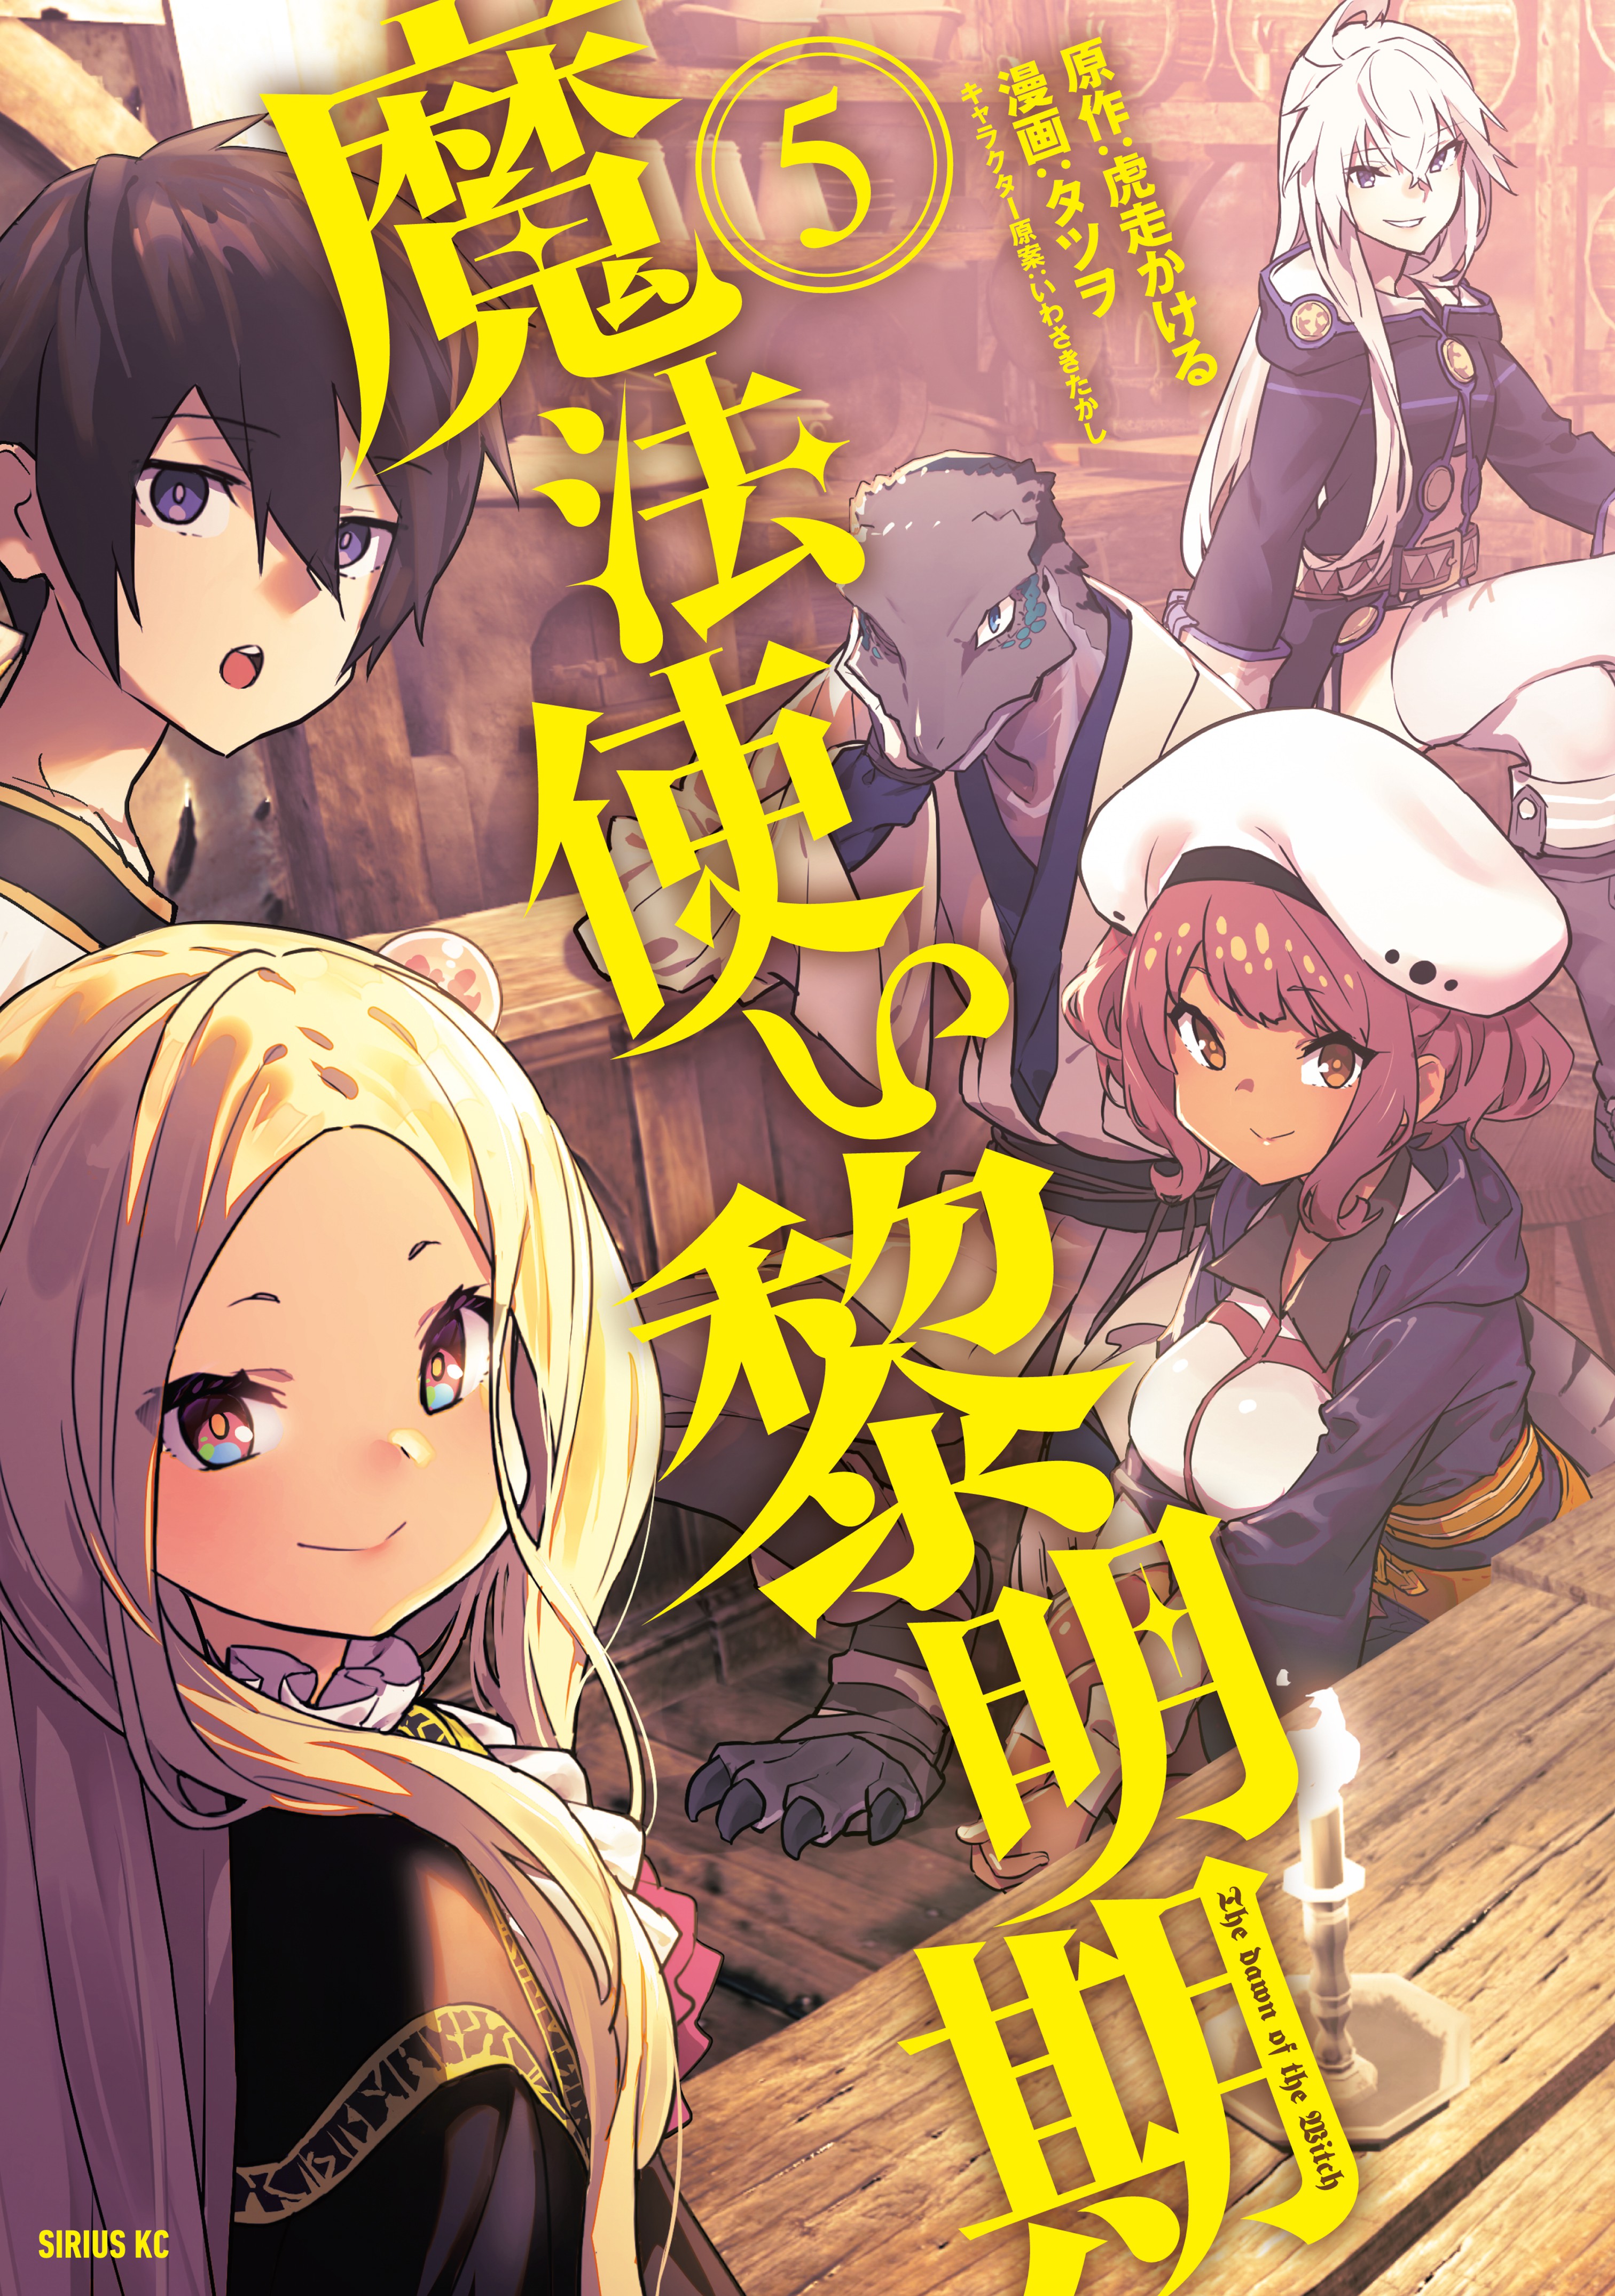 Anime news The DAWN of the WITCH TV Anime will Premieres in April 2022   TradNow